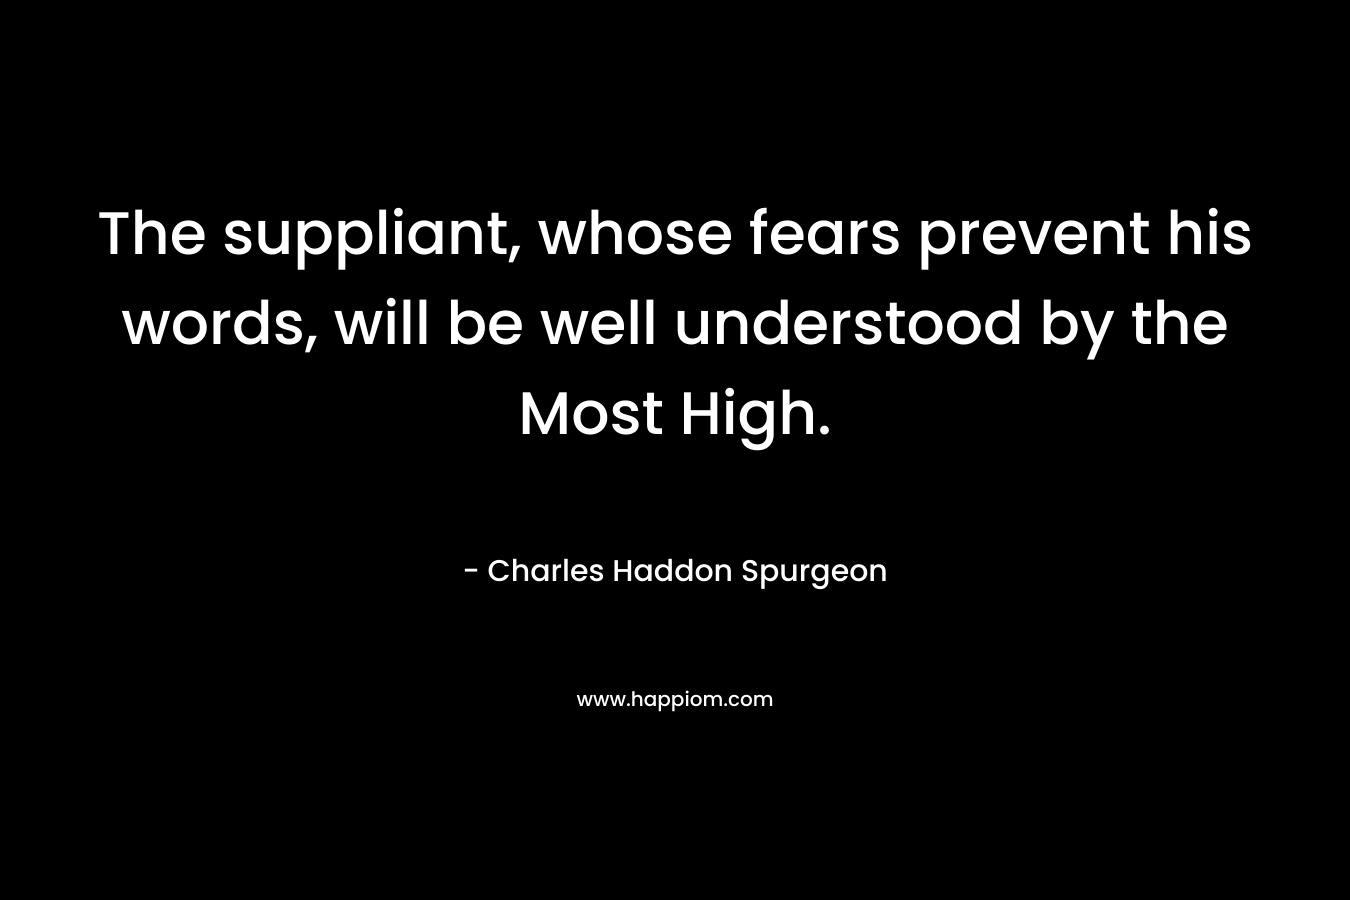 The suppliant, whose fears prevent his words, will be well understood by the Most High.